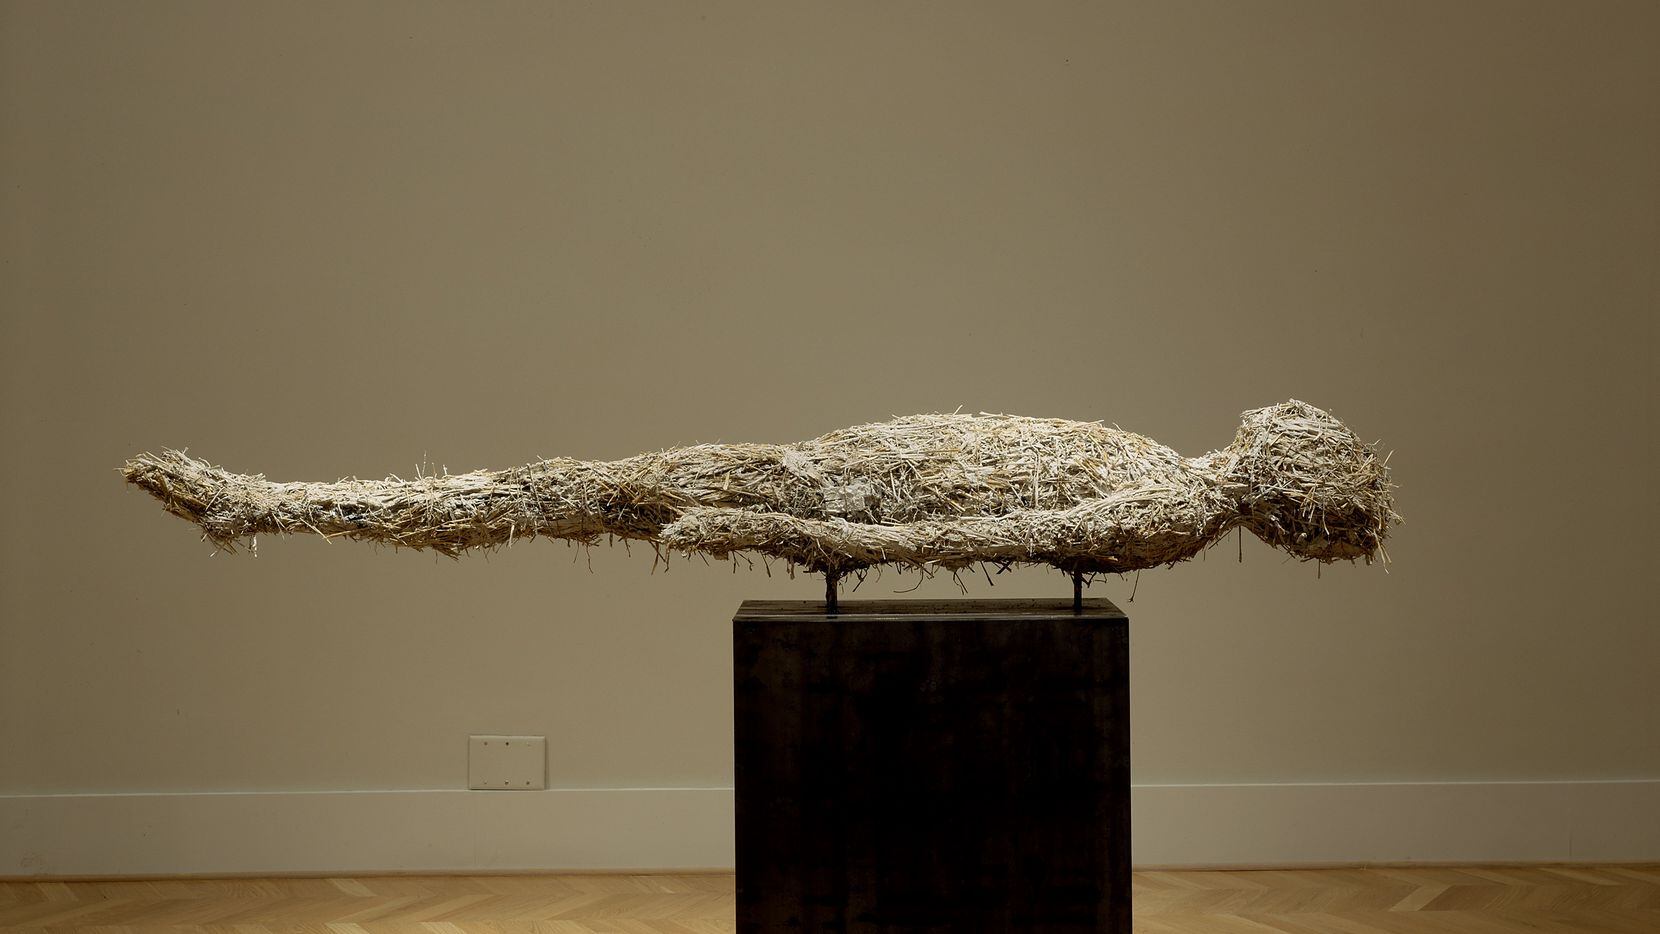 James Sullivan's "Float" is a 2002 sculpture made of plaster, straw, pigments and steel....